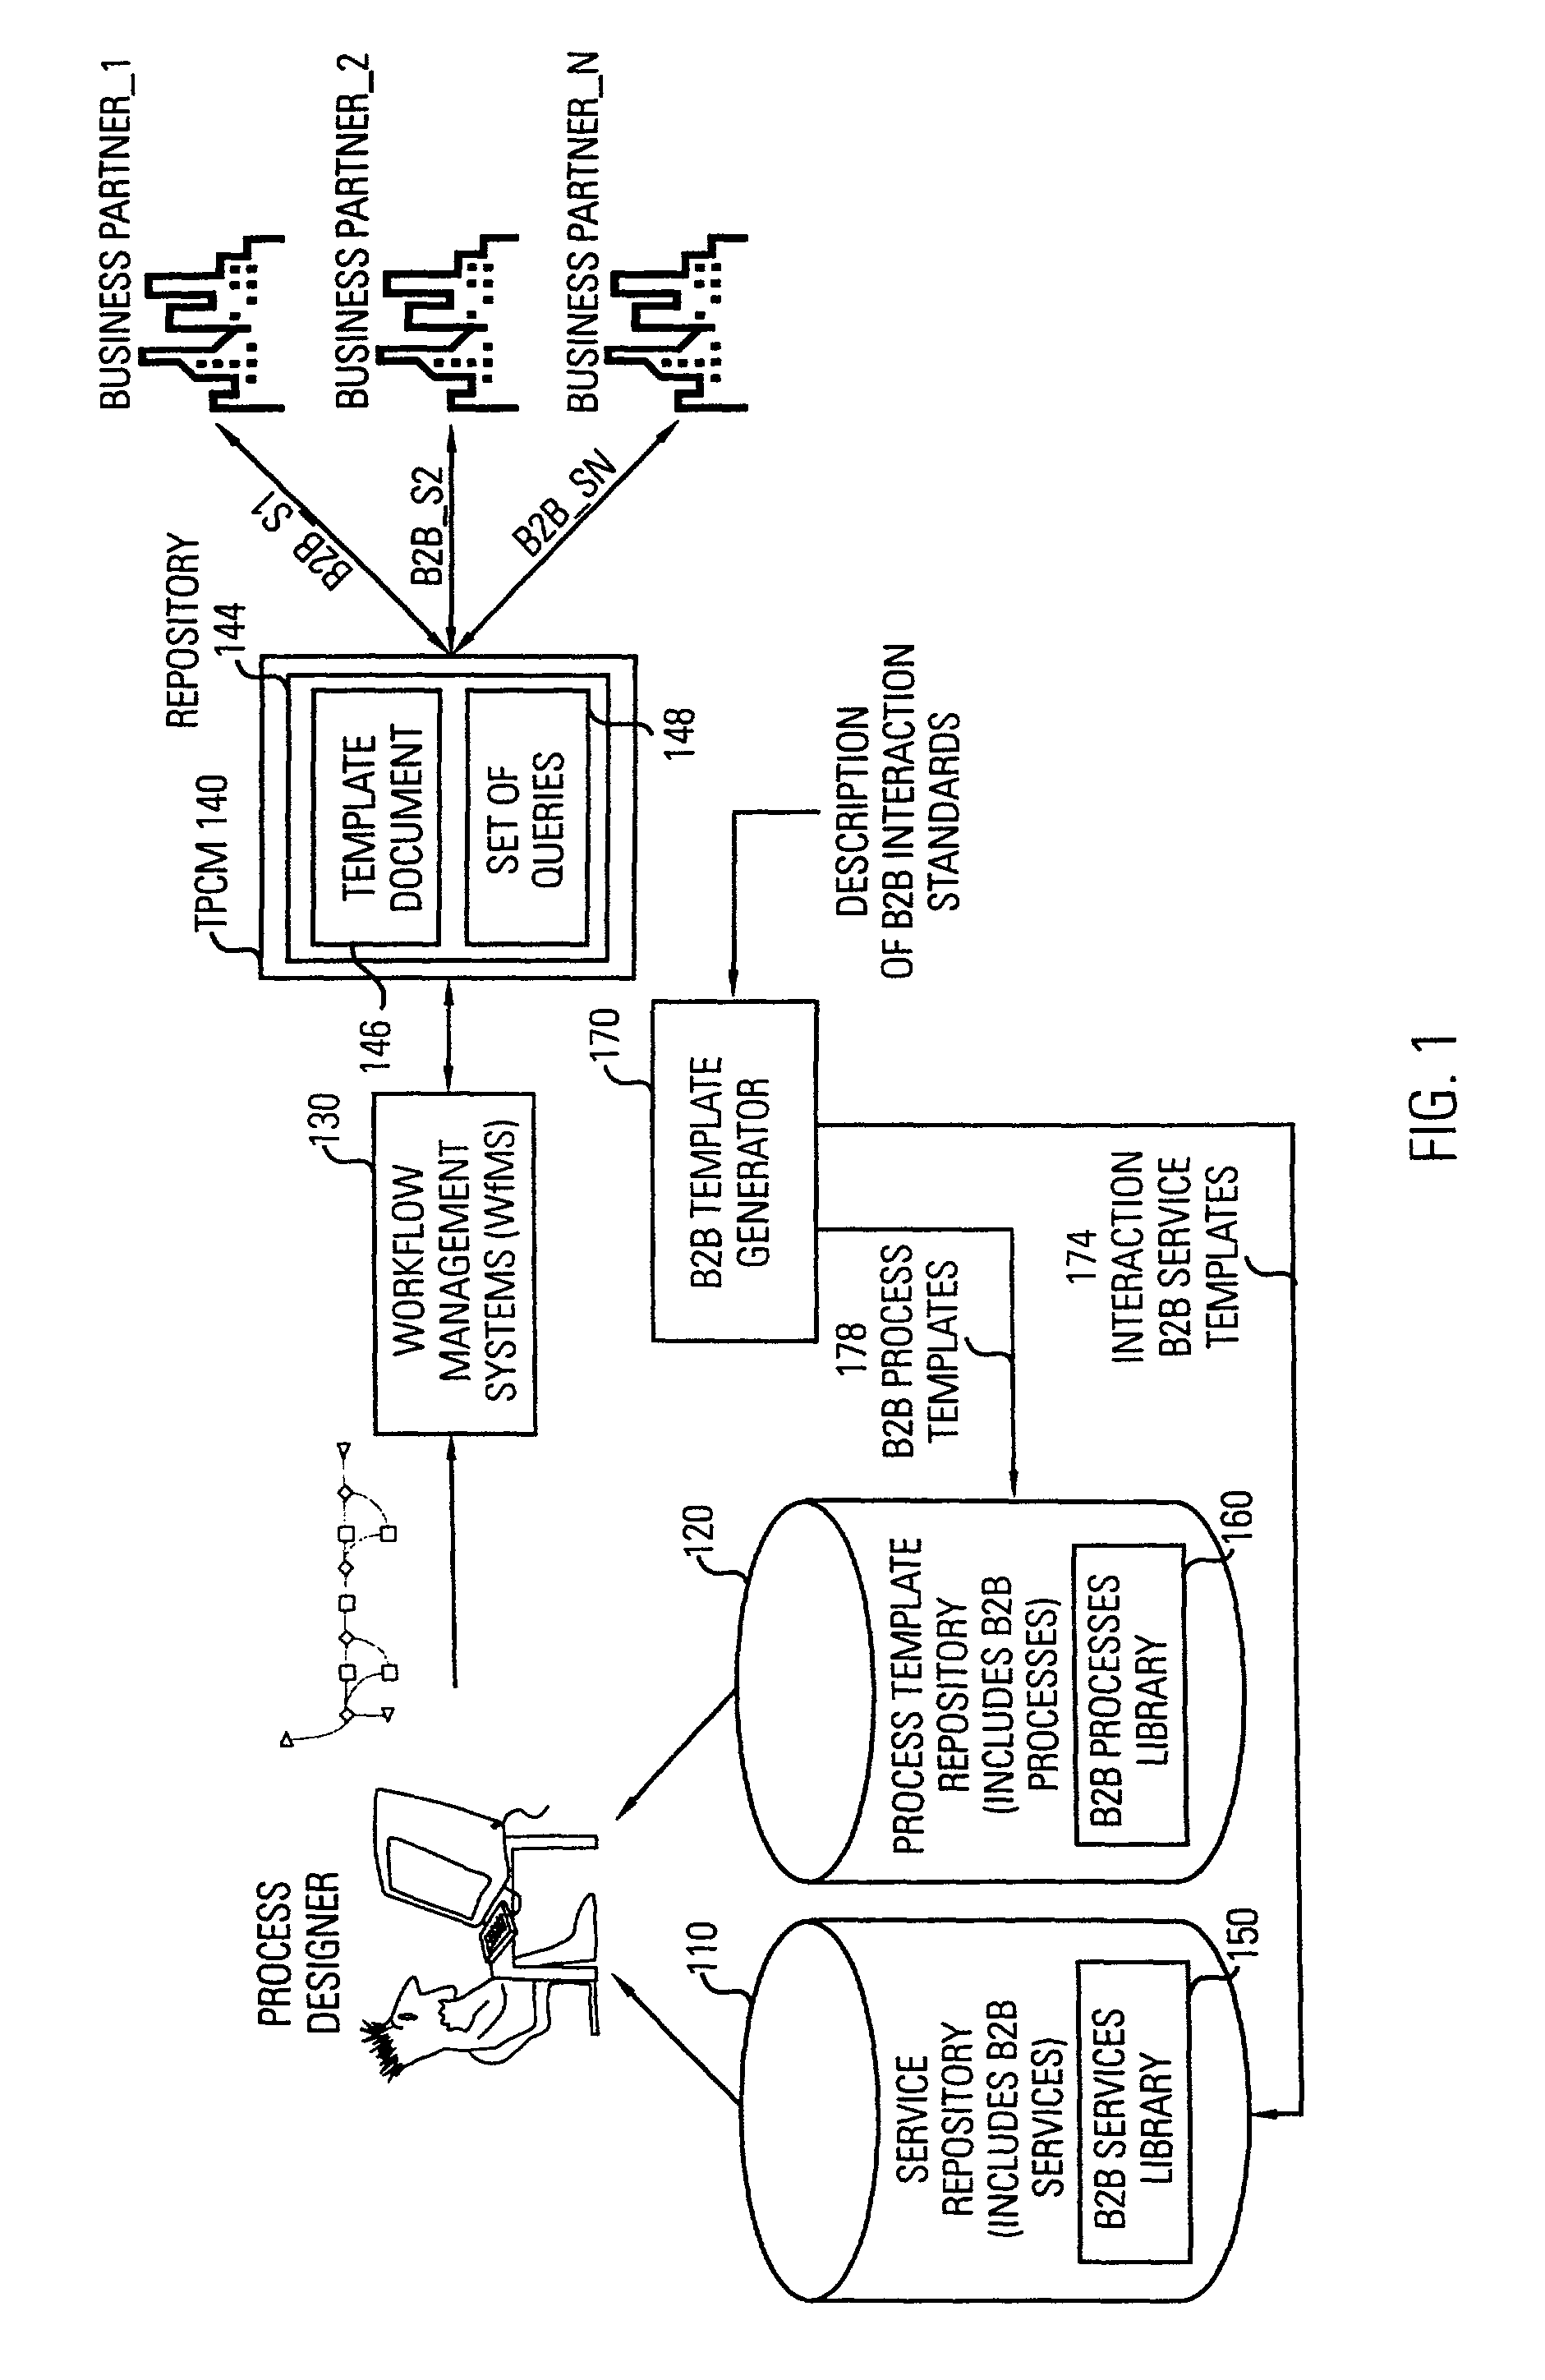 Method and system for integrating workflow management systems with business-to-business interaction standards